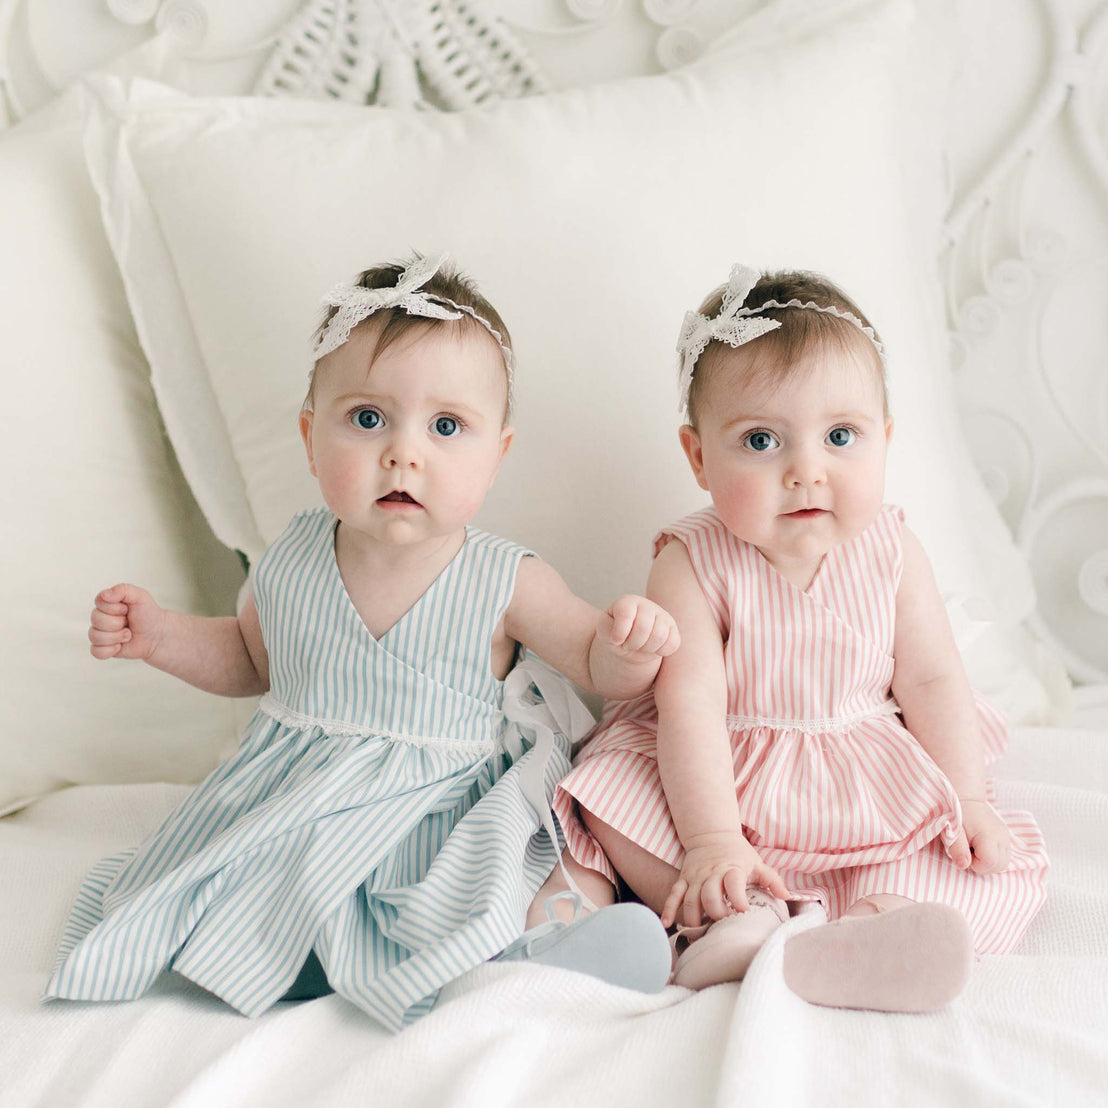 Two twin baby girls wearing the Thea Wrap Dress, one in blue and the other in pink, and matching Thea Lace Headband sit on a white bed, surrounded by pillows, looking directly at the camera.